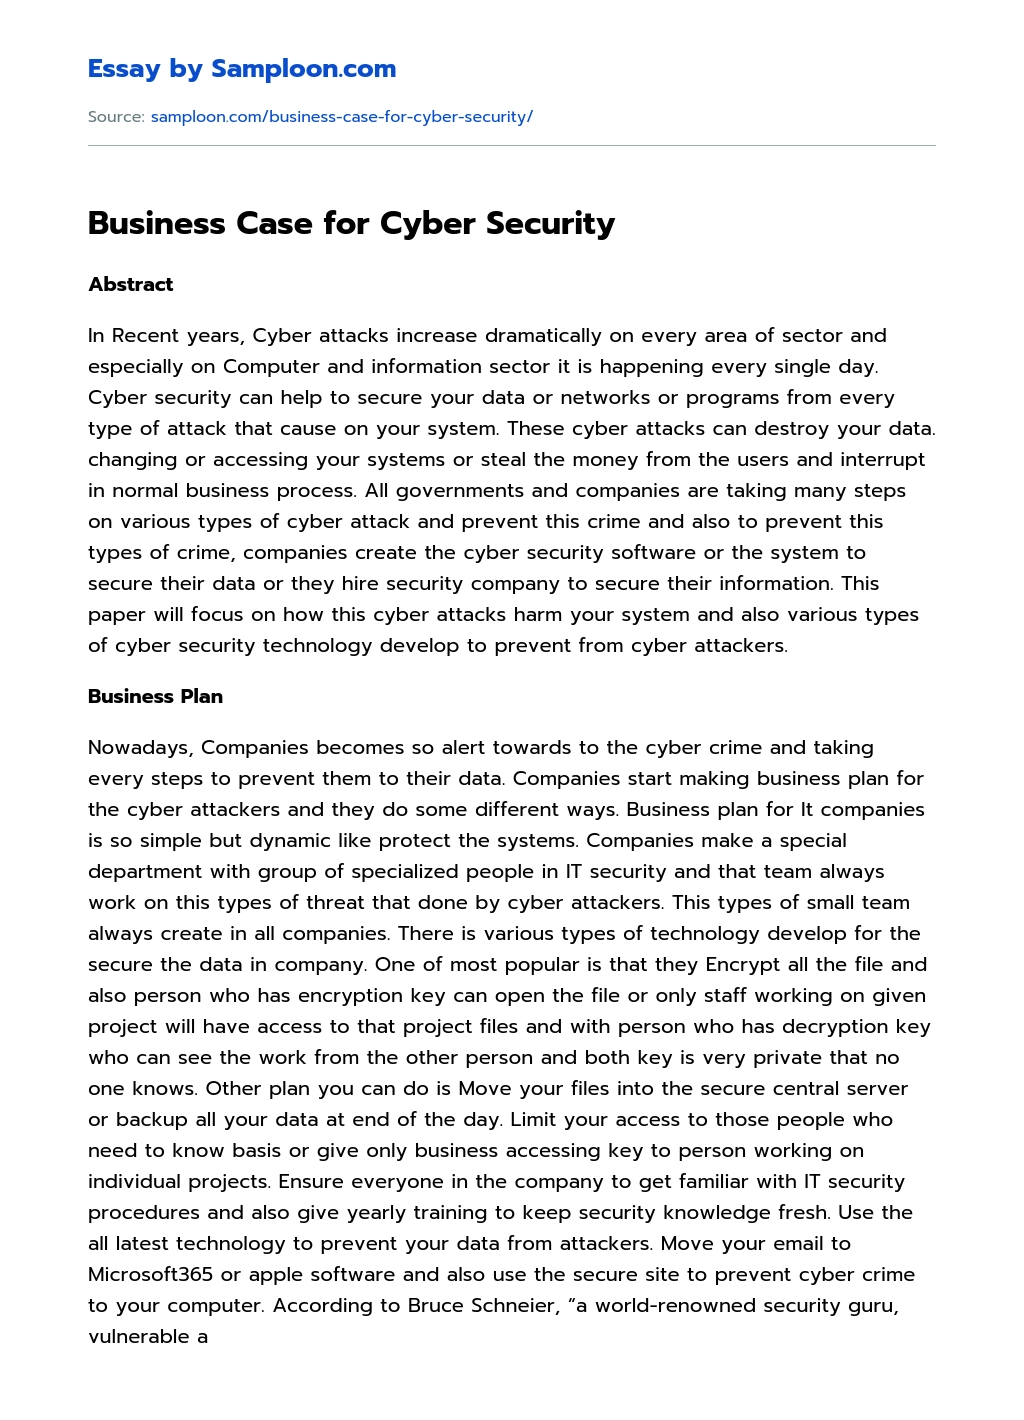 Business Case for Cyber Security essay